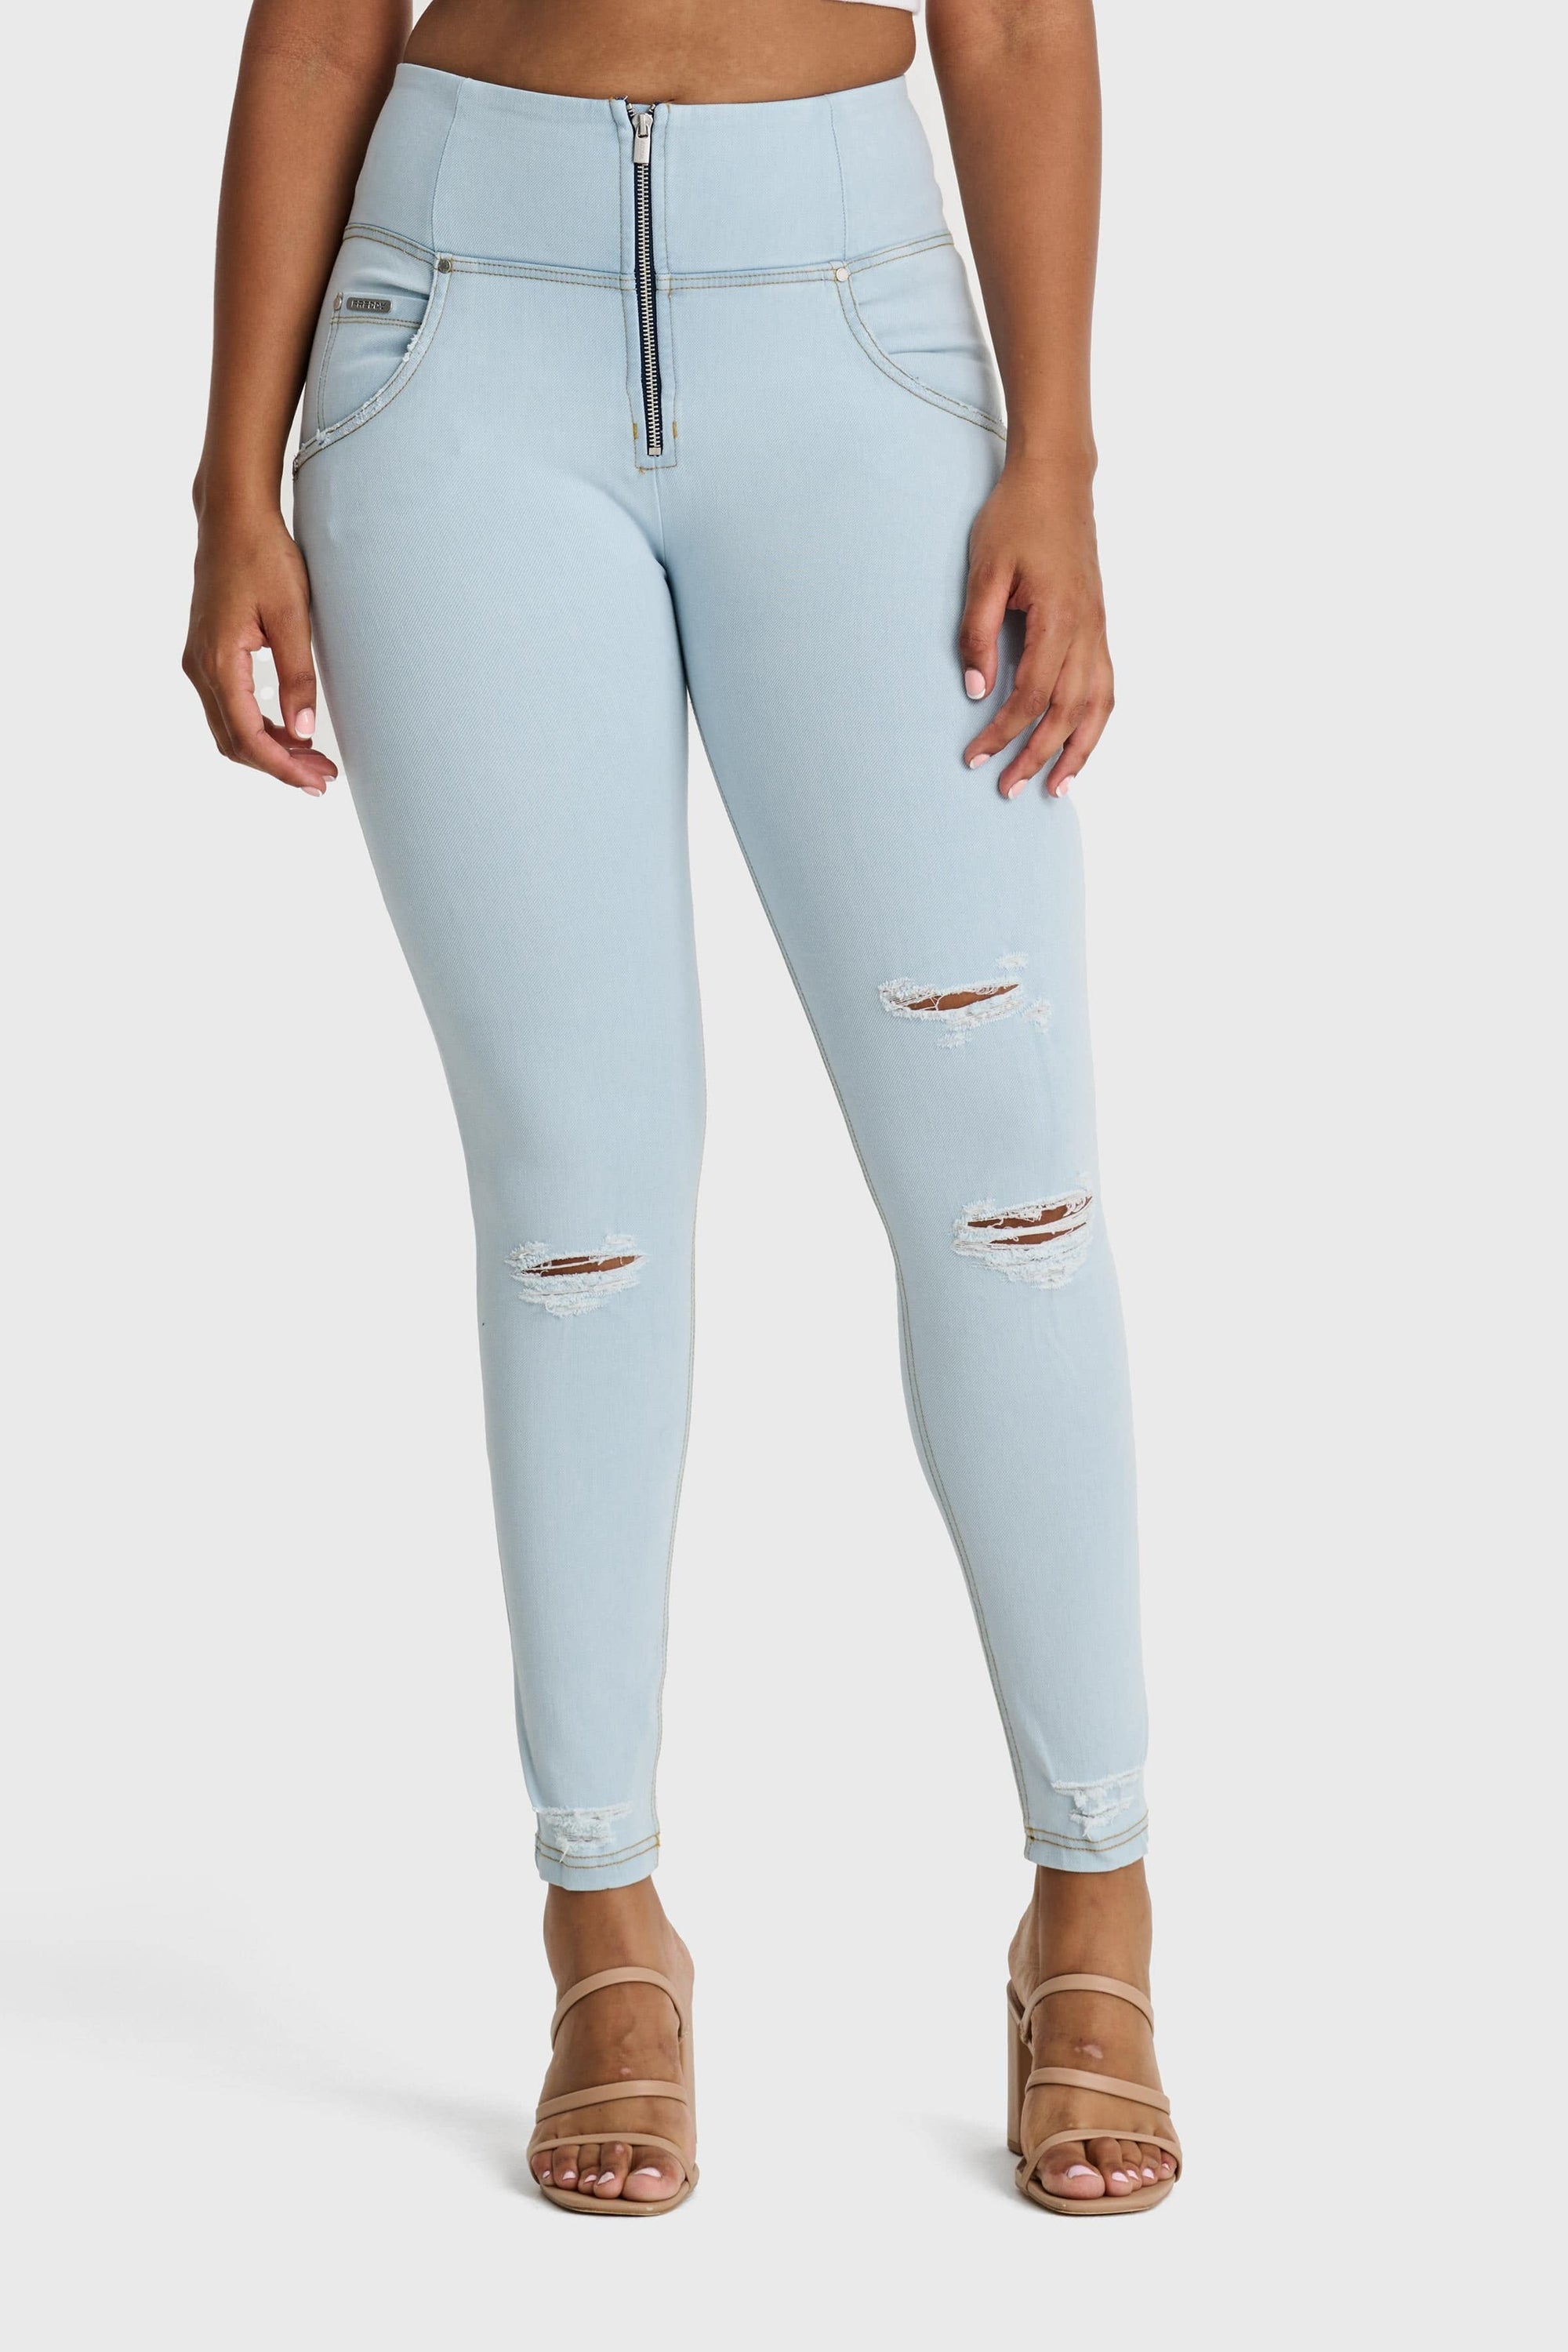 WR.UP® Snug Distressed Jeans - High Waisted - Full Length - Baby Blue + Yellow Stitching 2